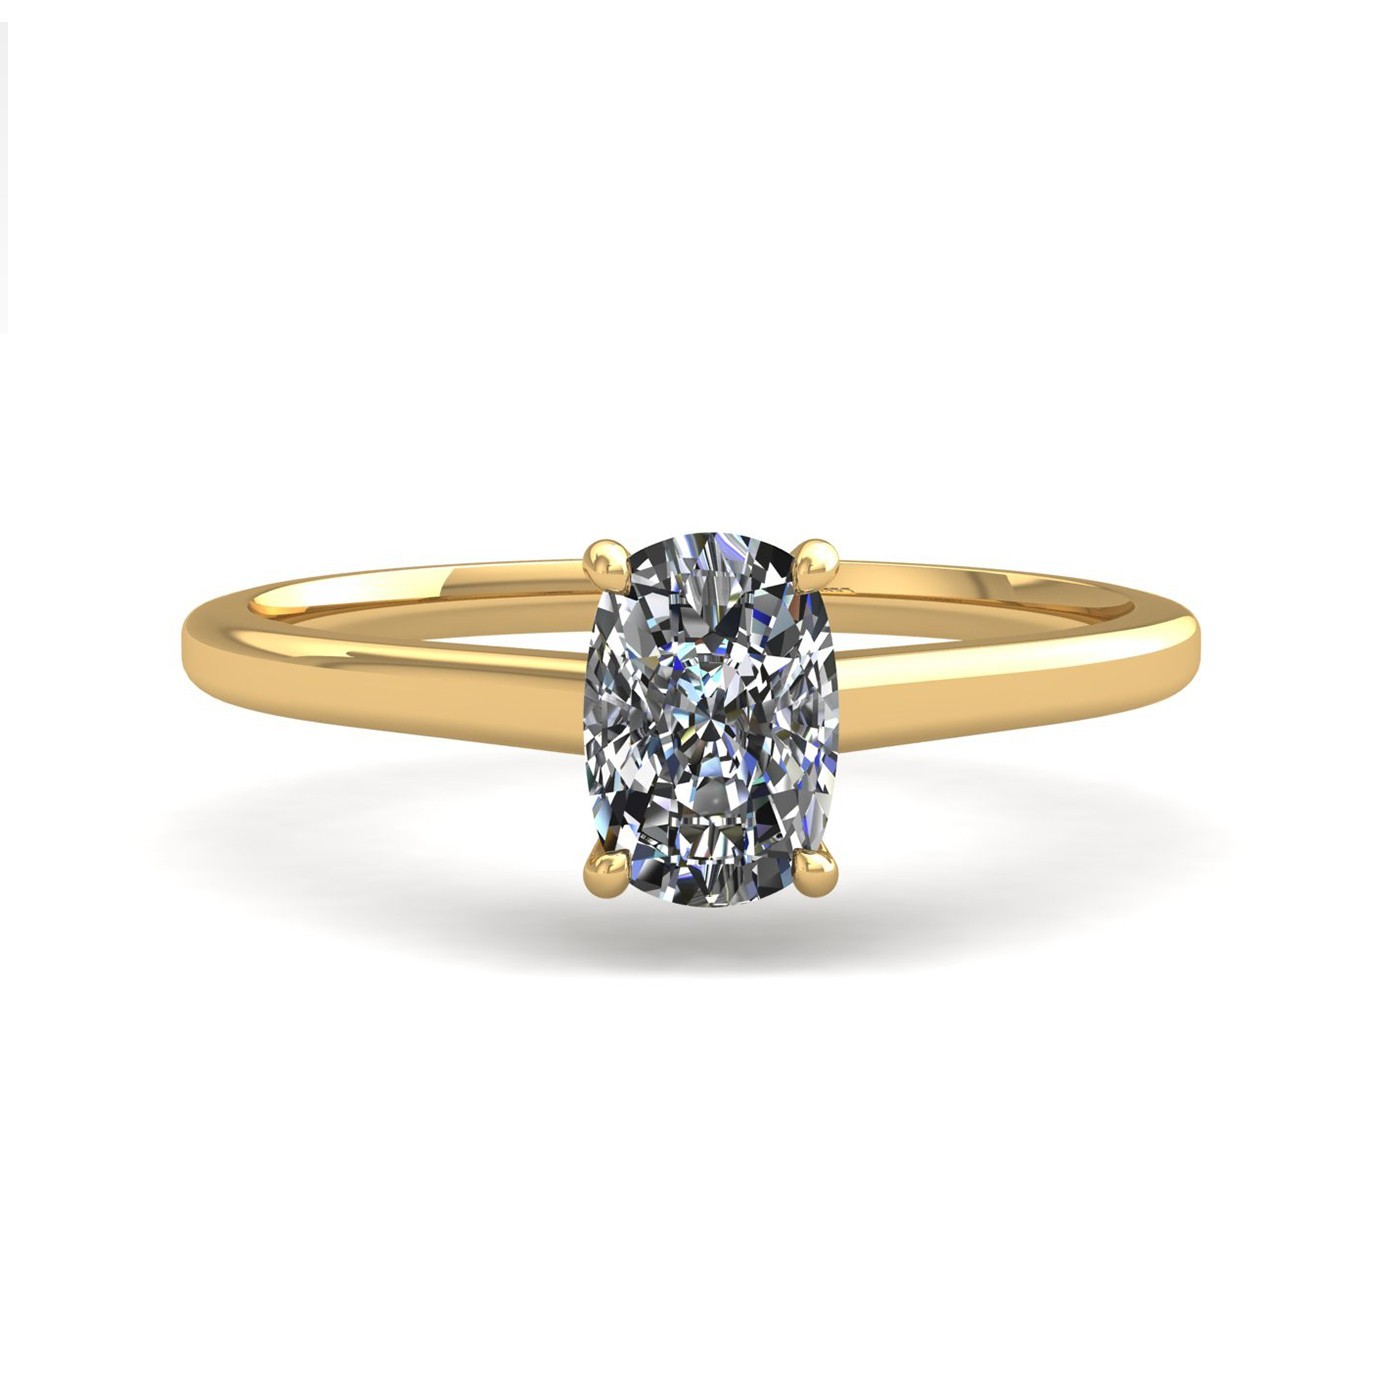 18k yellow gold  2.00 ct 4 prongs solitaire elongated cushion cut diamond engagement ring with whisper thin band Photos & images